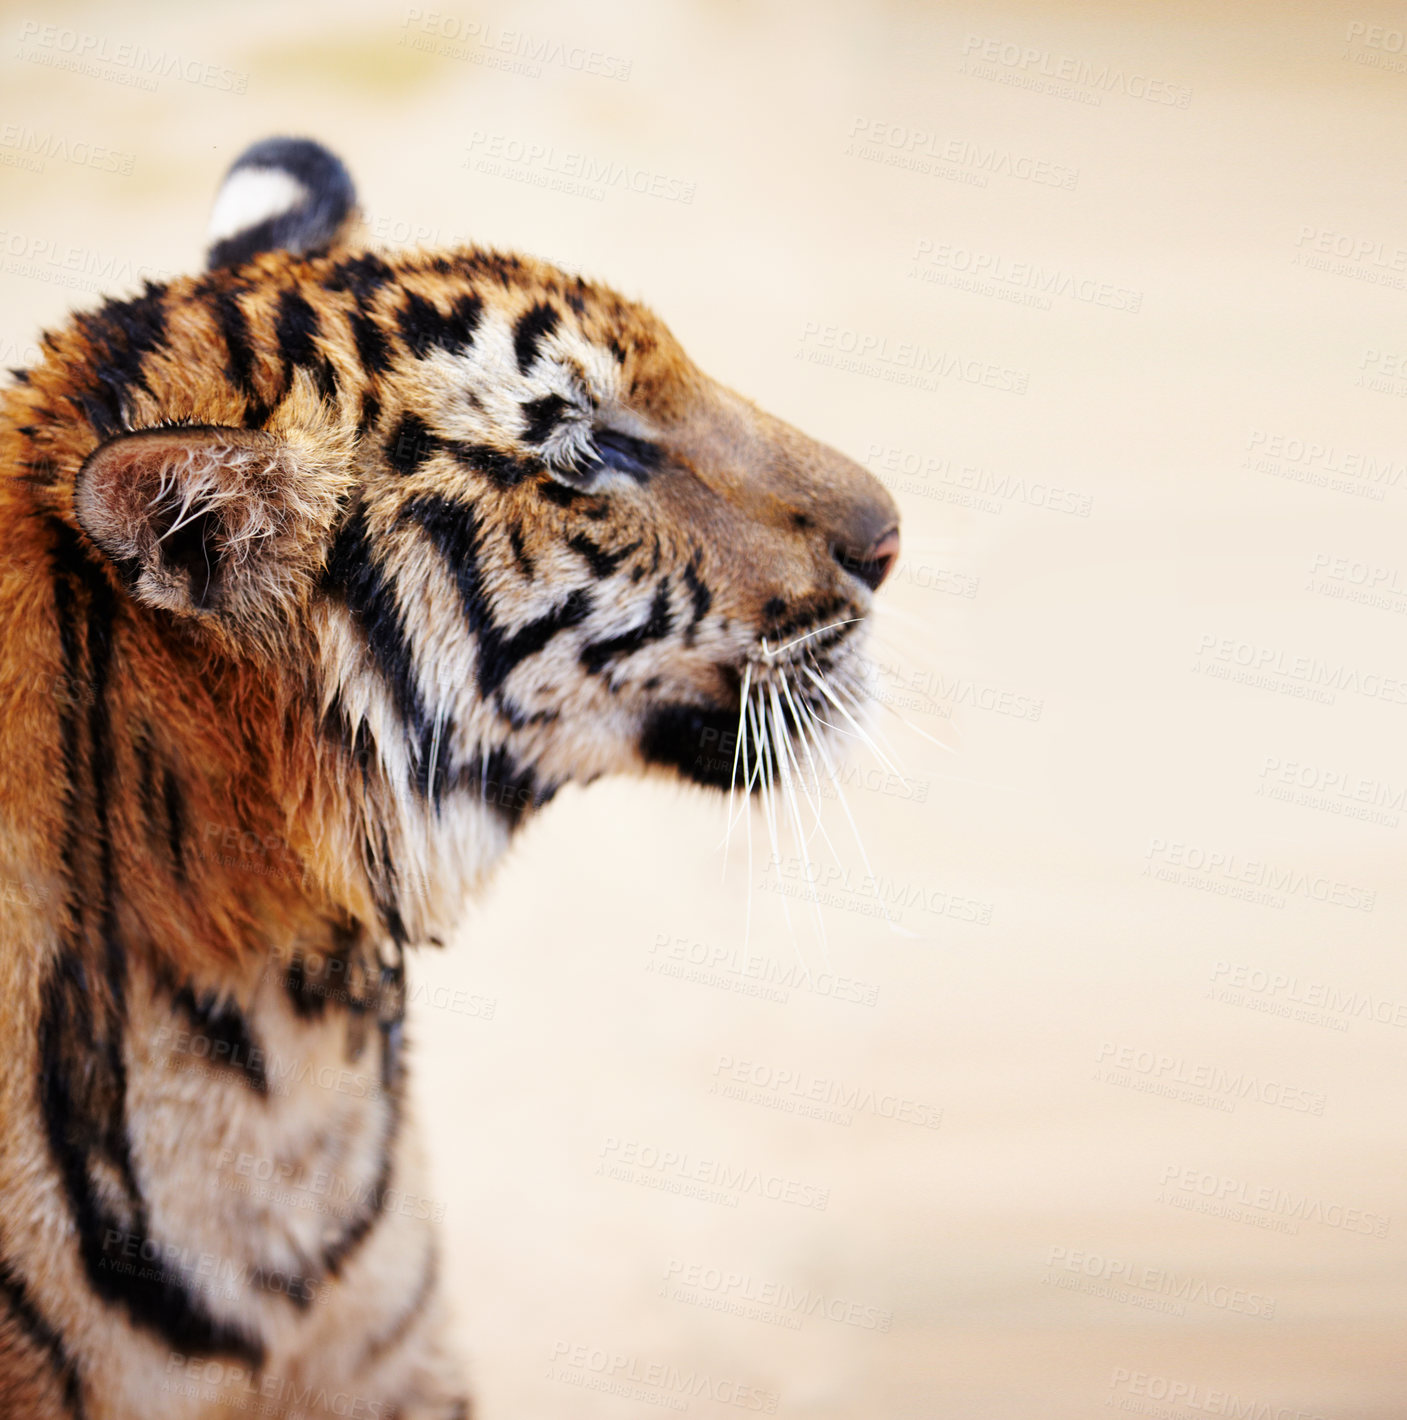 Buy stock photo Side view of an adult tiger with long white whiskers. A close-up portrait of a beautiful calm tiger sitting in the jungle or by the water. A freshly bathed feline with a blurred background. 